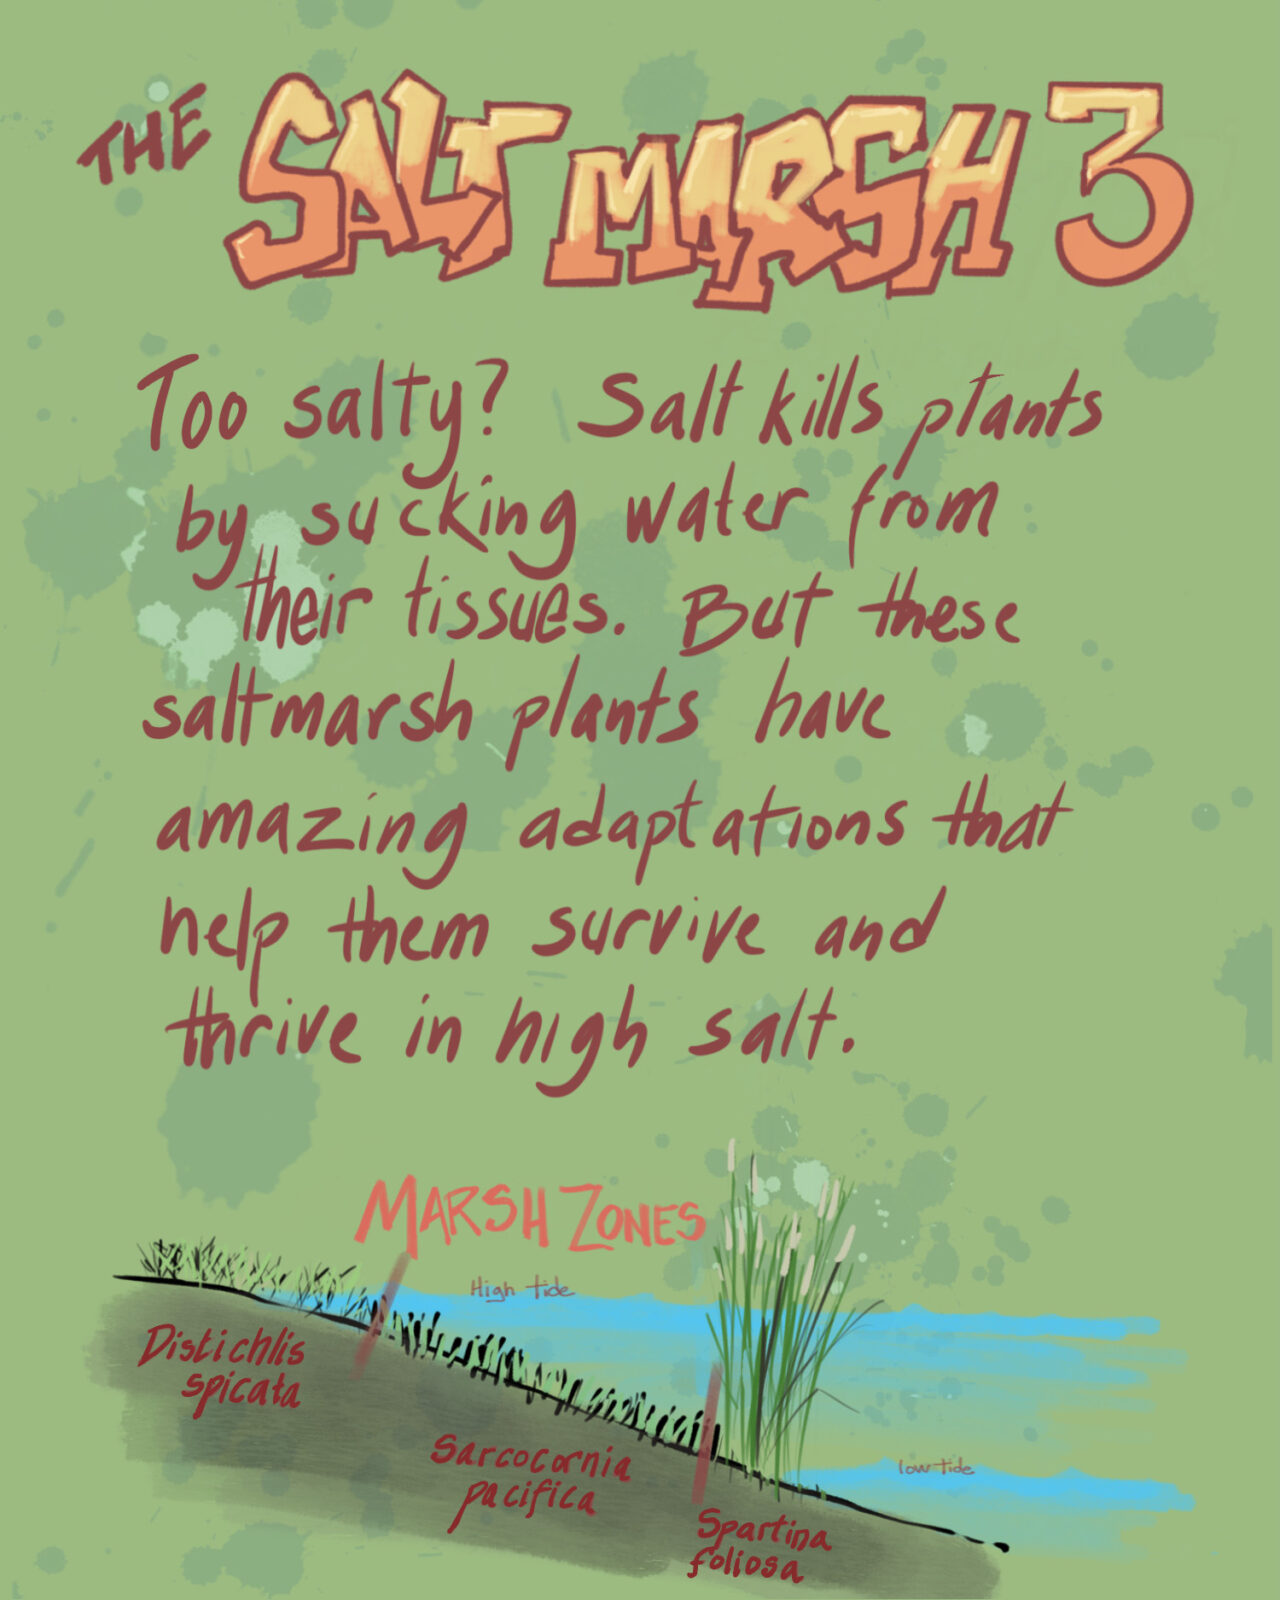 Meet the Salt Marsh 3: Too salty? Salt kills plants by sucking water from their tissues. But these plants have amazing adaptations that help them survive and thrive in high salt. 